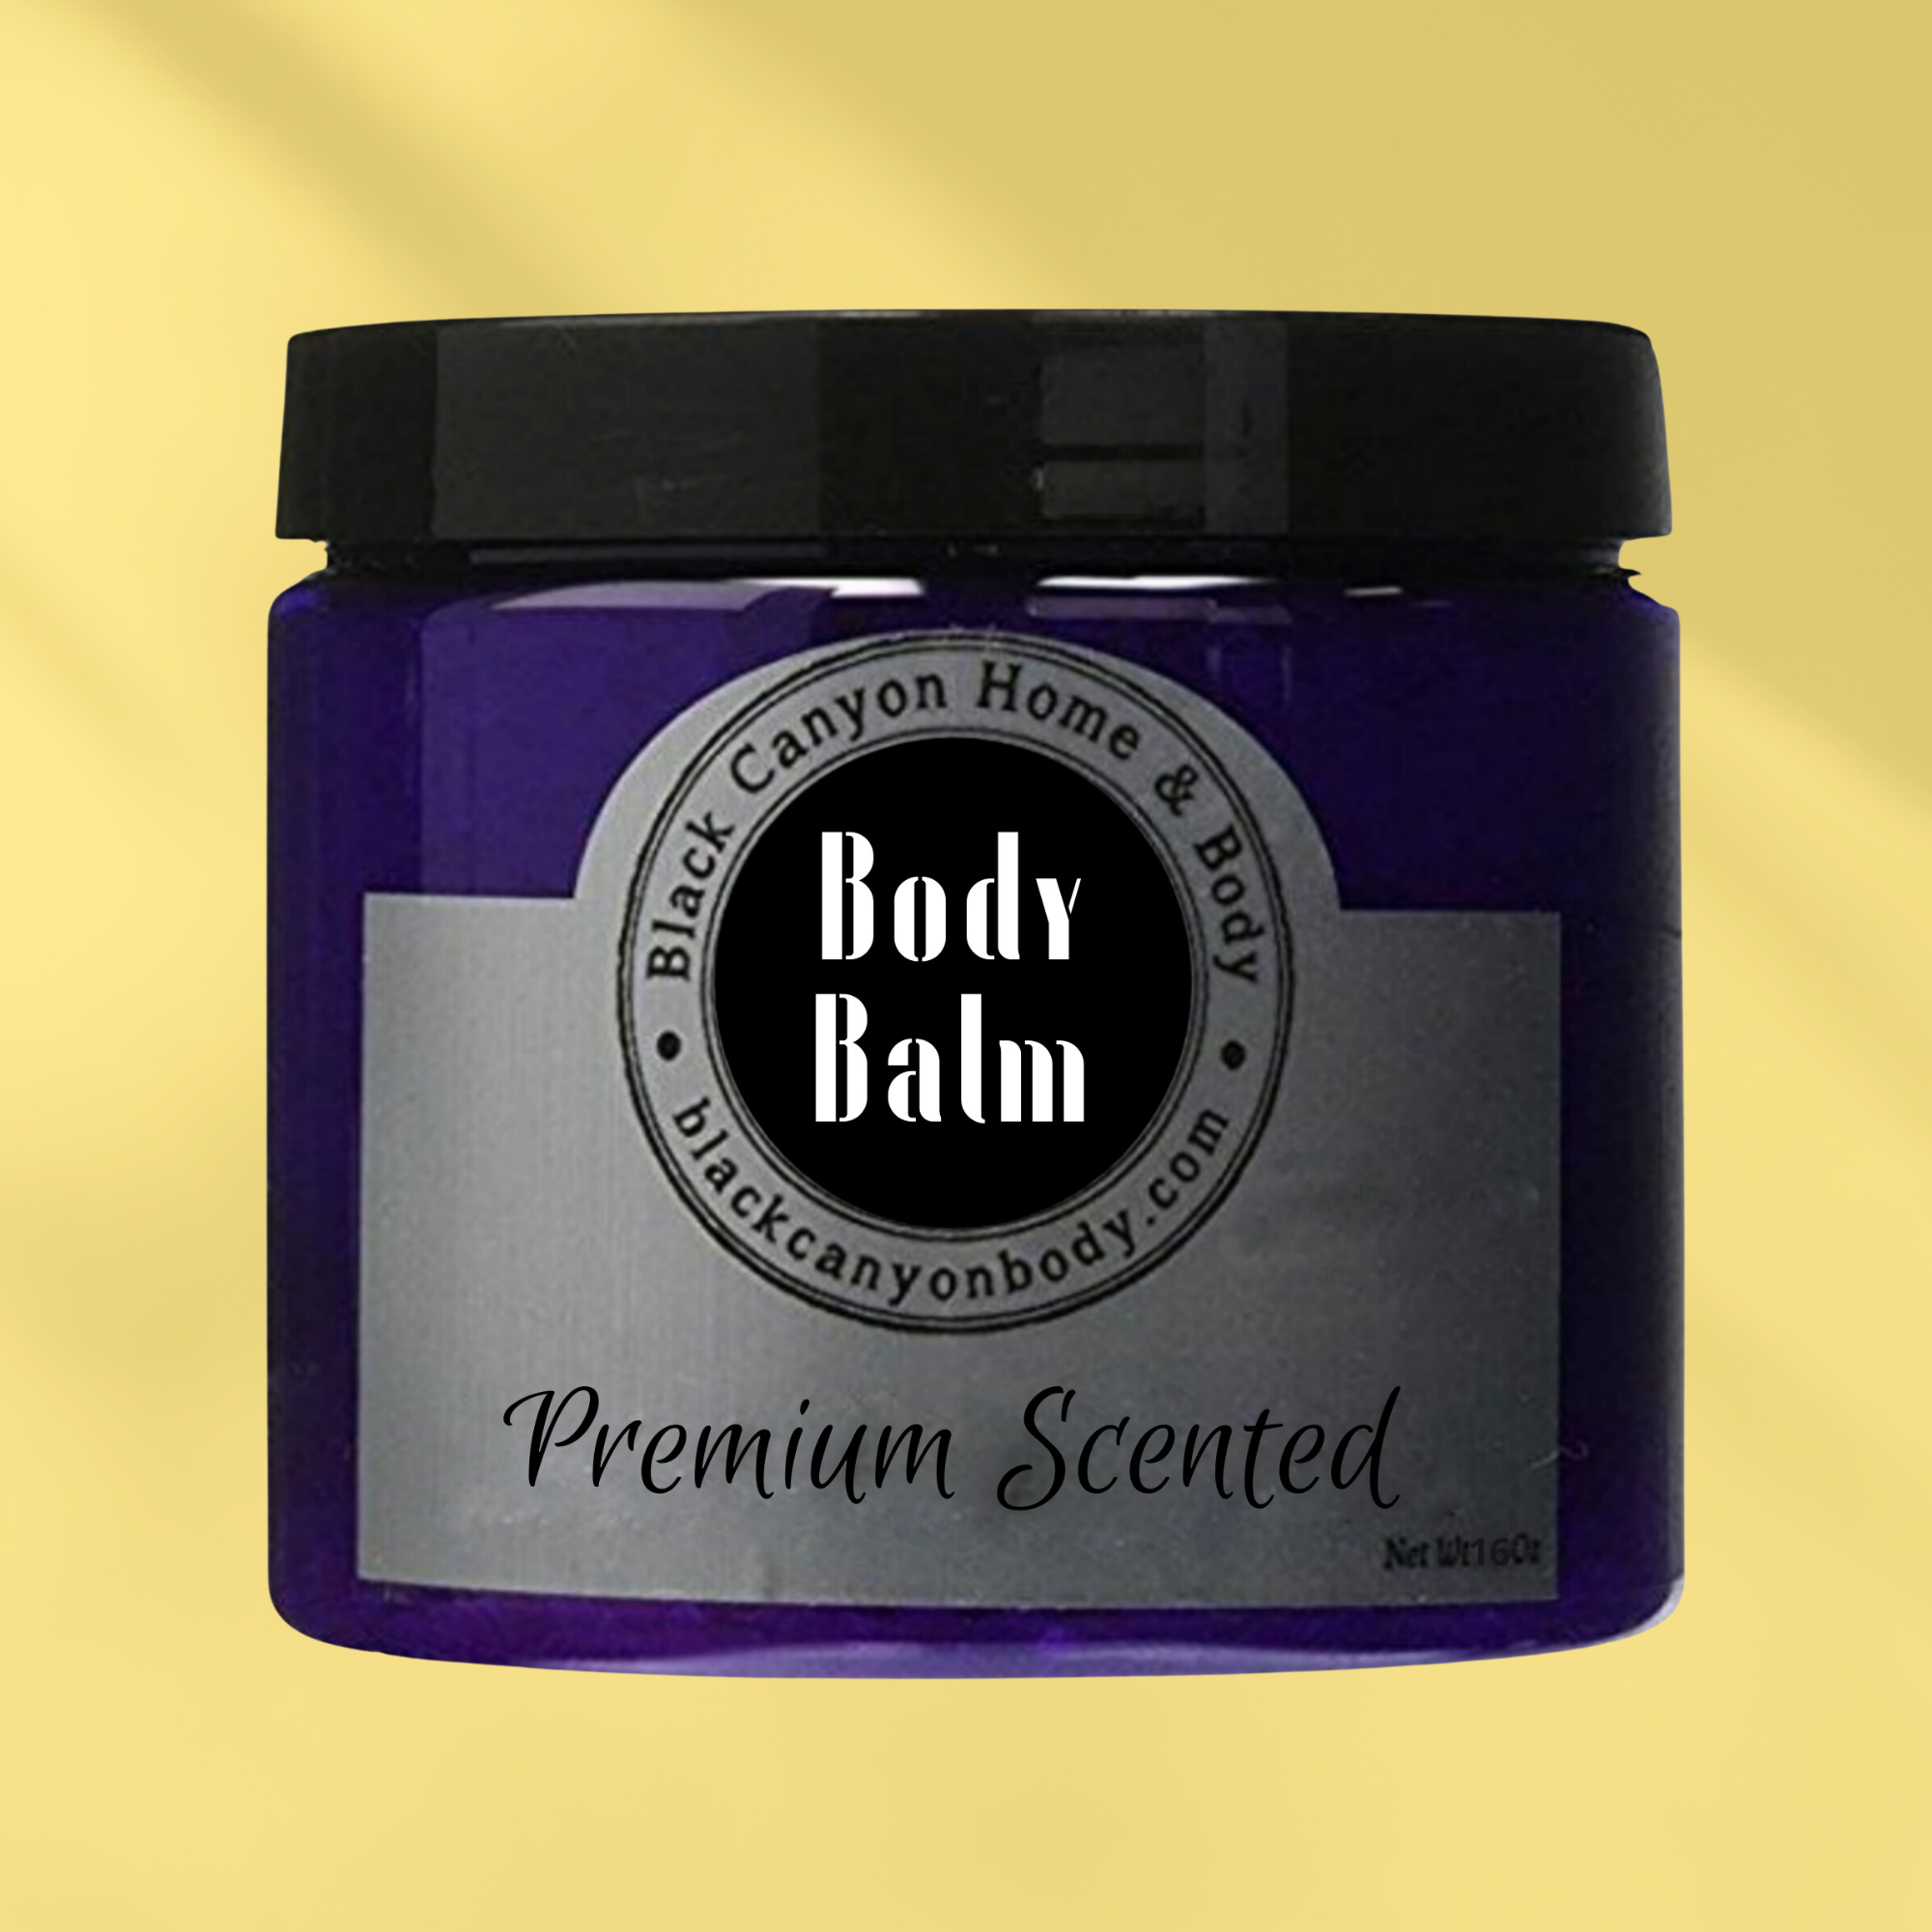 Black Canyon Lemon Mint Scented Natural Body Balm with Shea